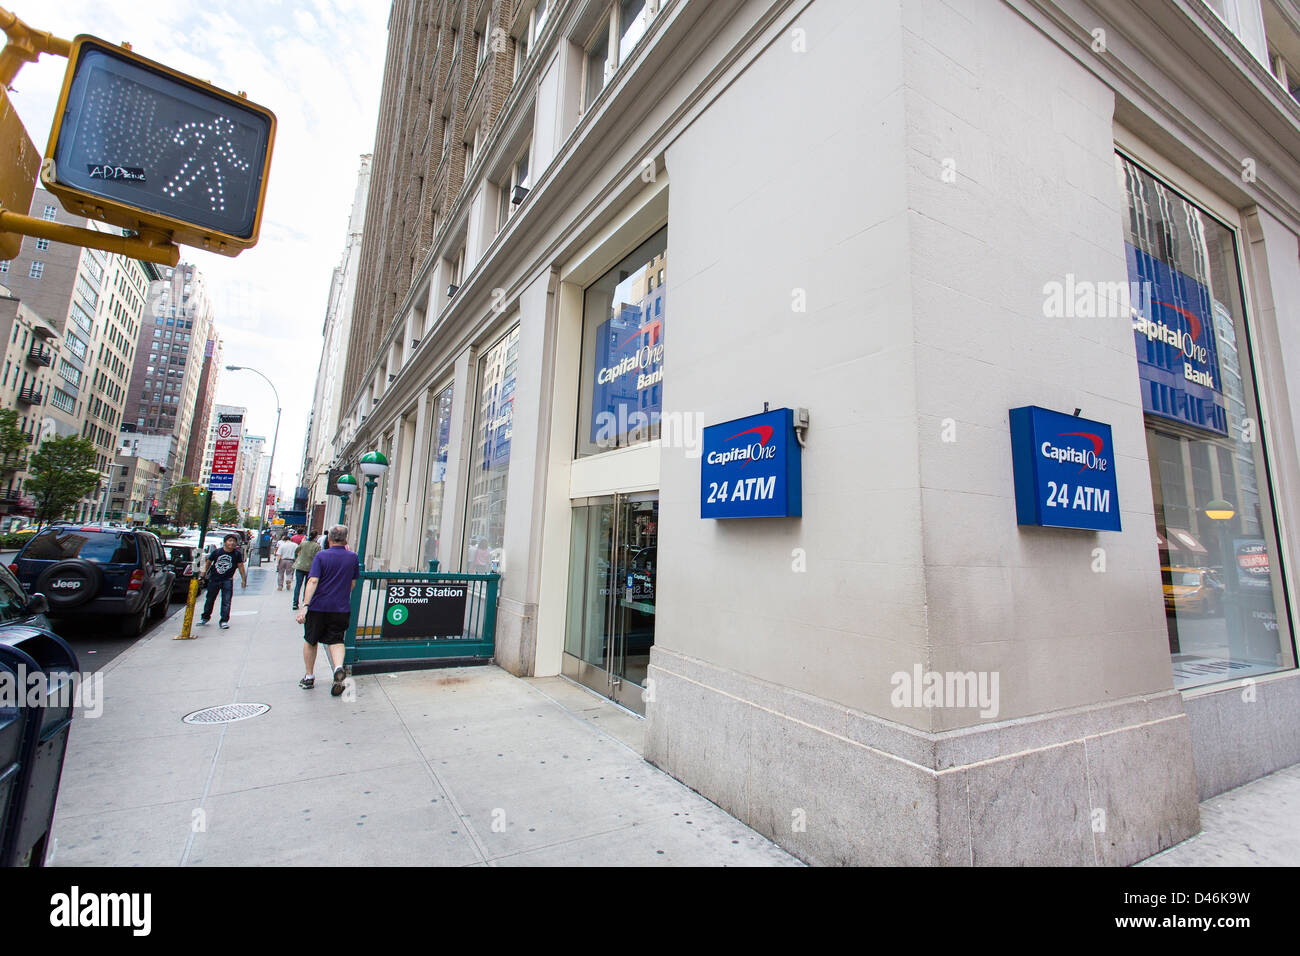 Capital One bank store front in New York City, NY Stock Photo